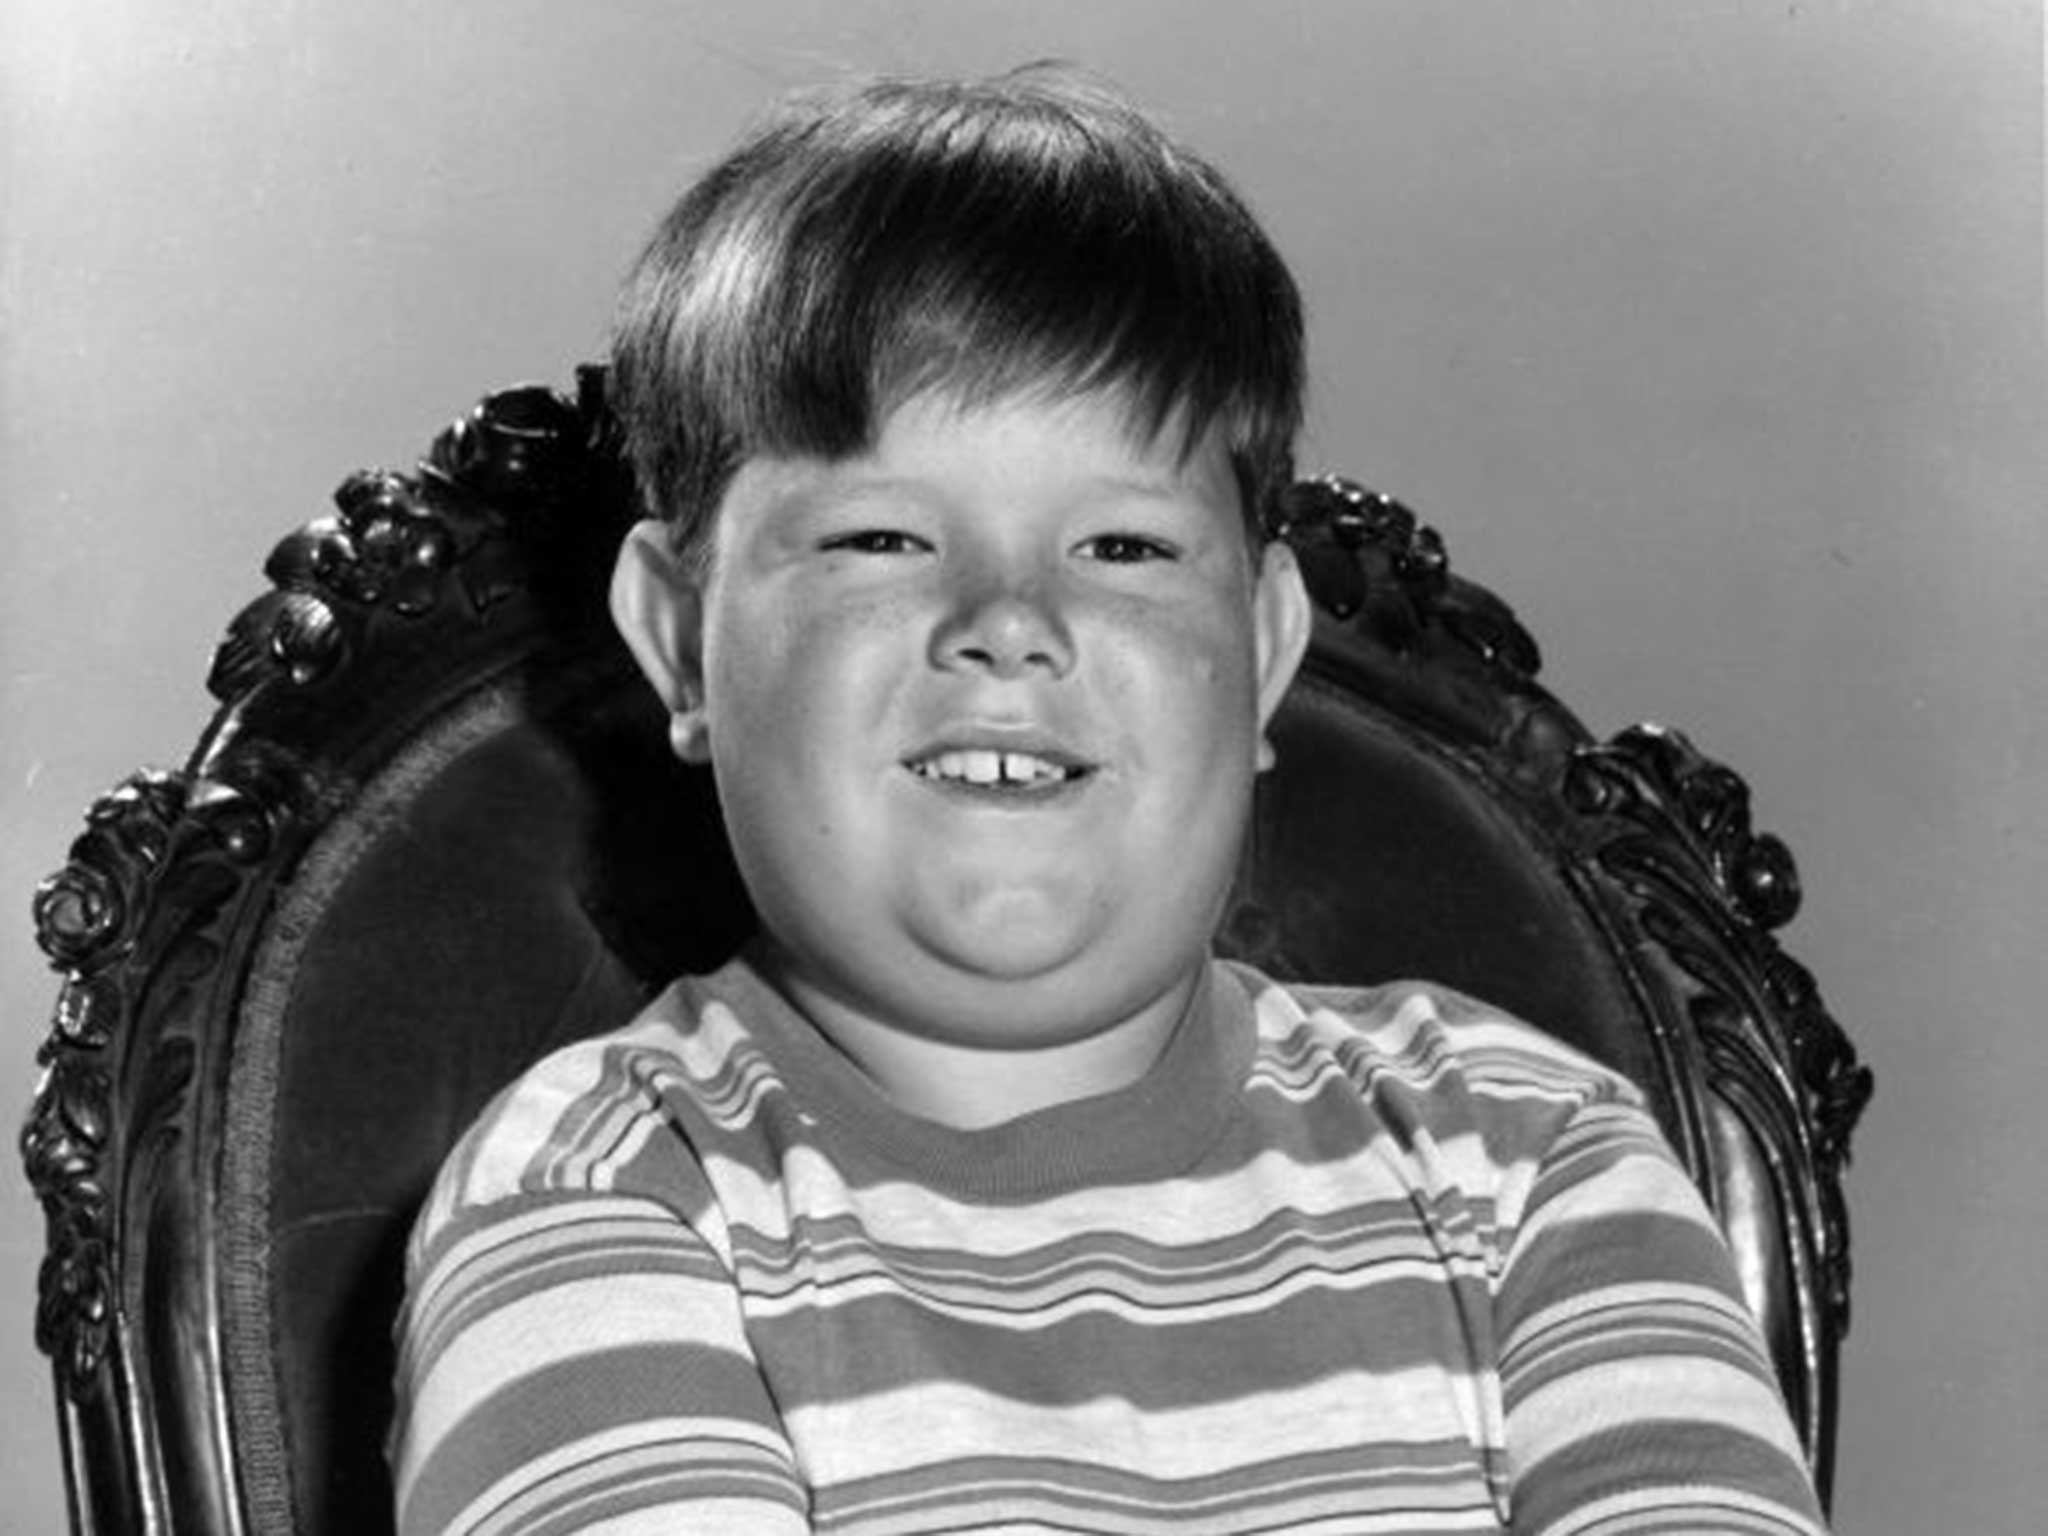 Weatherwax as Pugsley: a jovial inventor, the Addams’ son built a robot and a computer, as well as a disintegrator gun